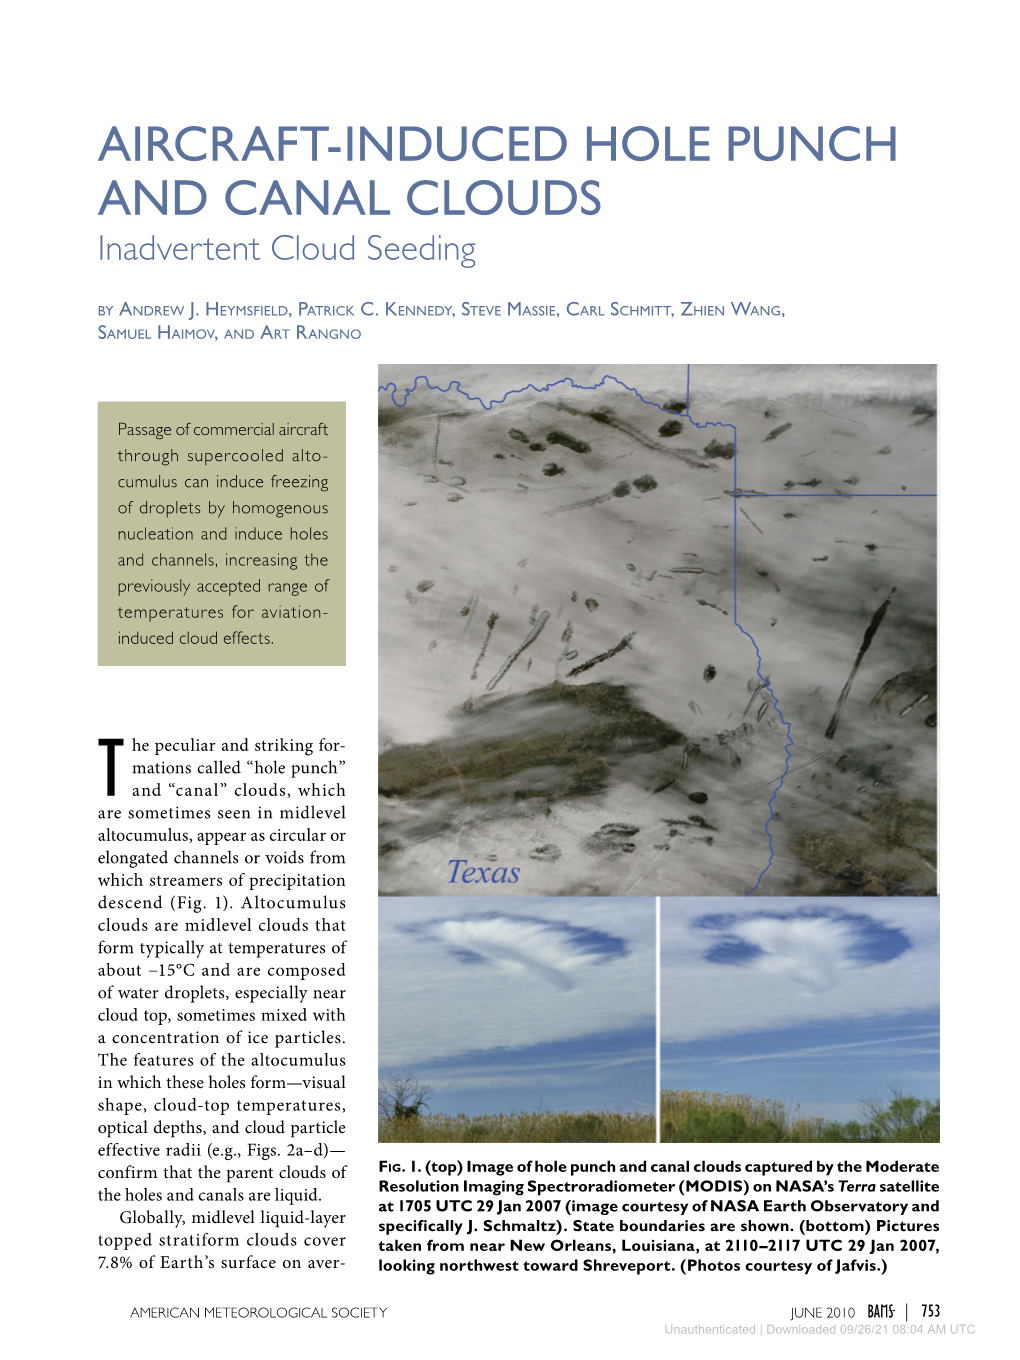 Aircrafttinduced Hole Punch and Canal Clouds